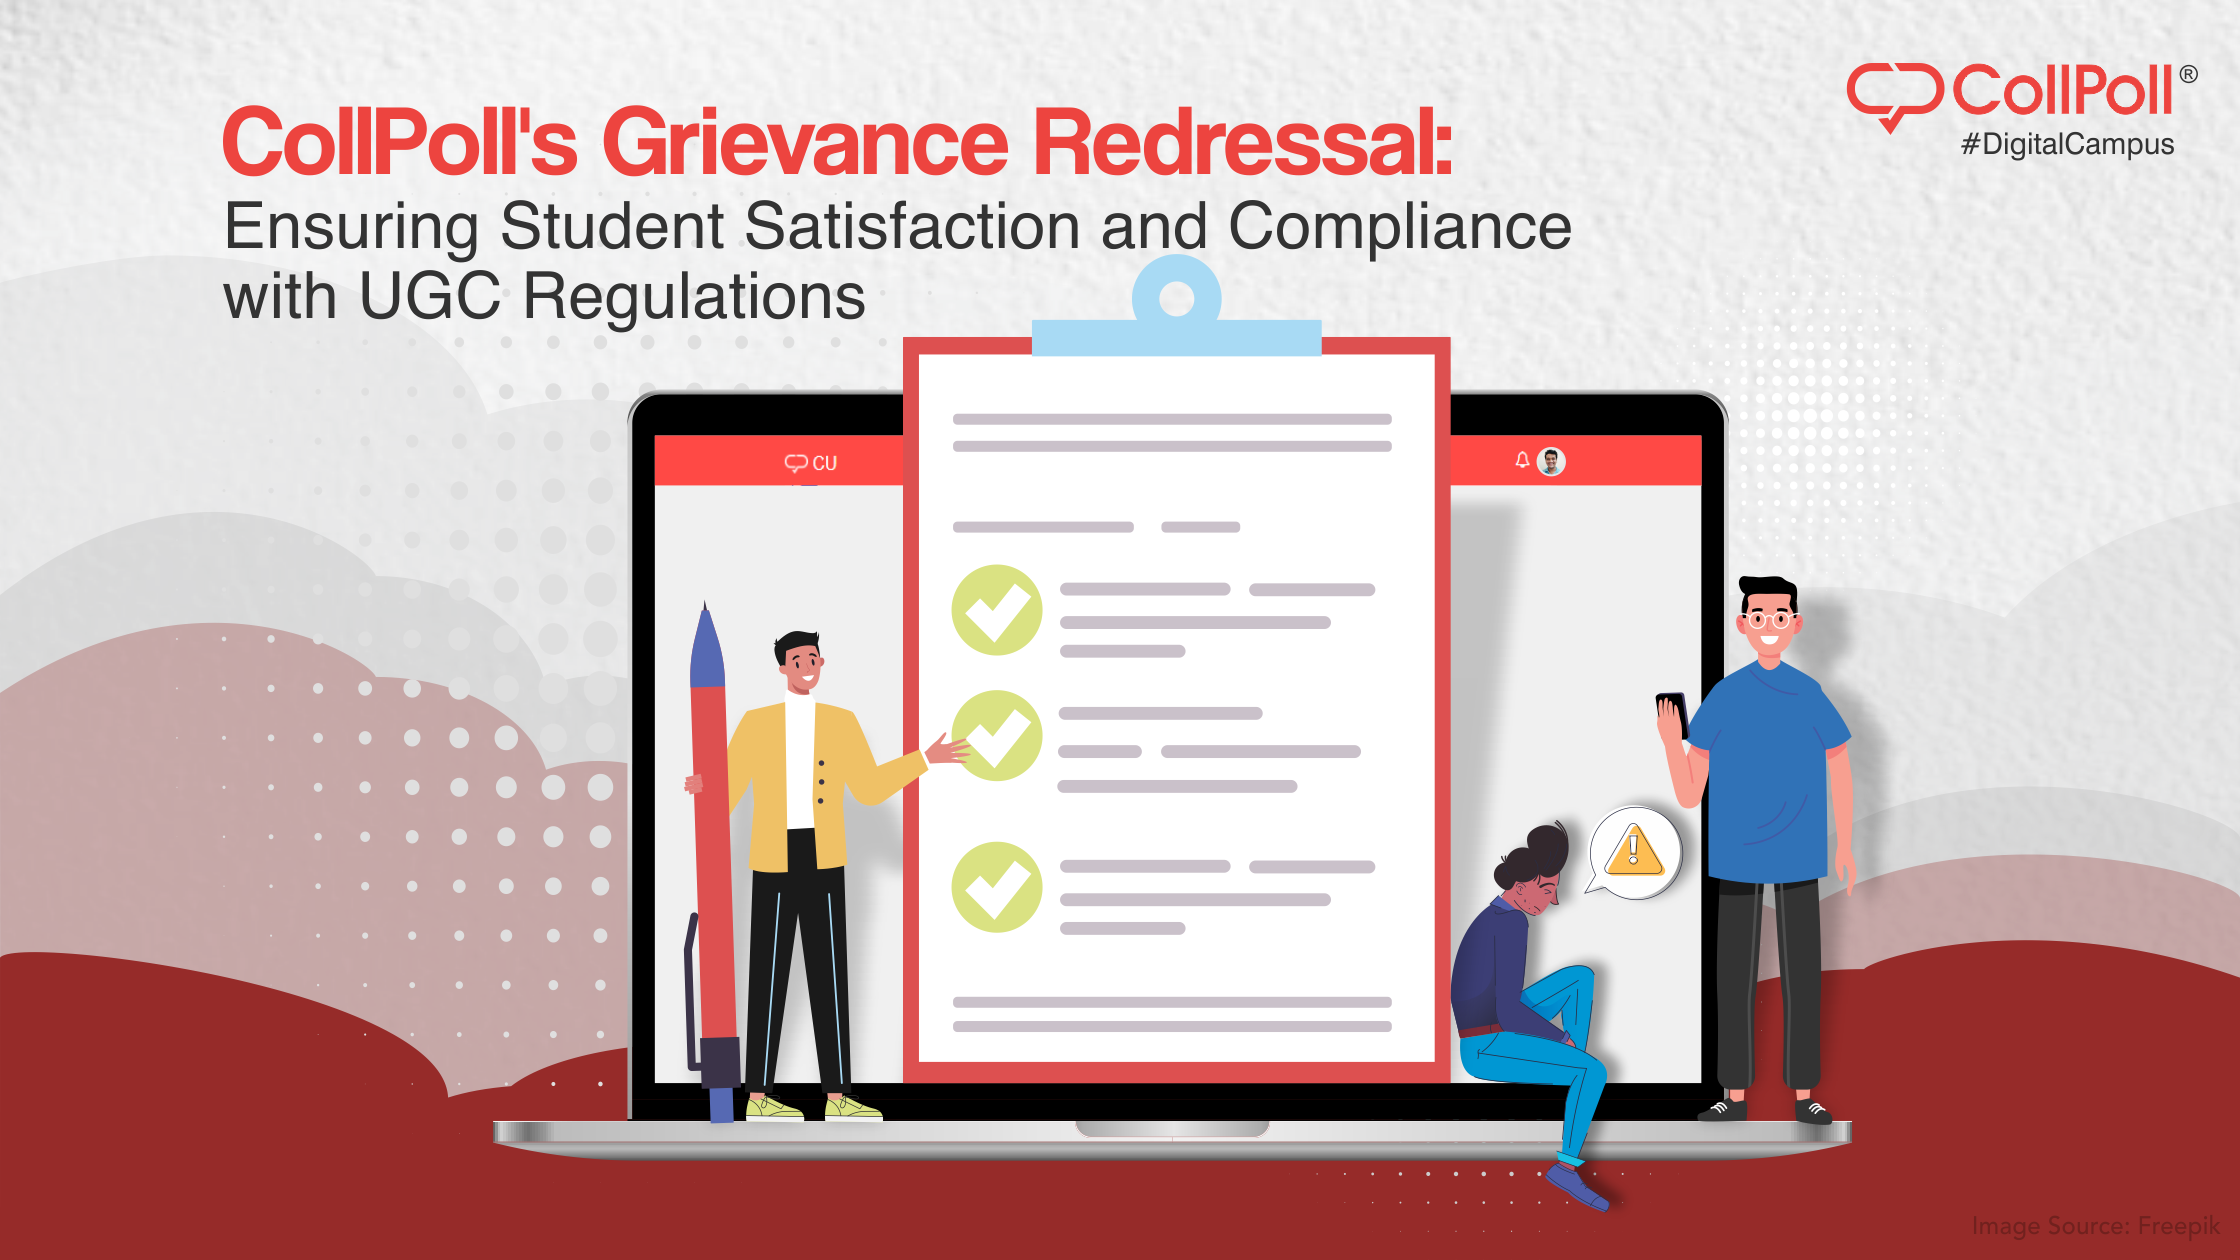 CollPoll's Grievance Redressal: Ensuring Student Satisfaction & Compliance with UGC Regulations